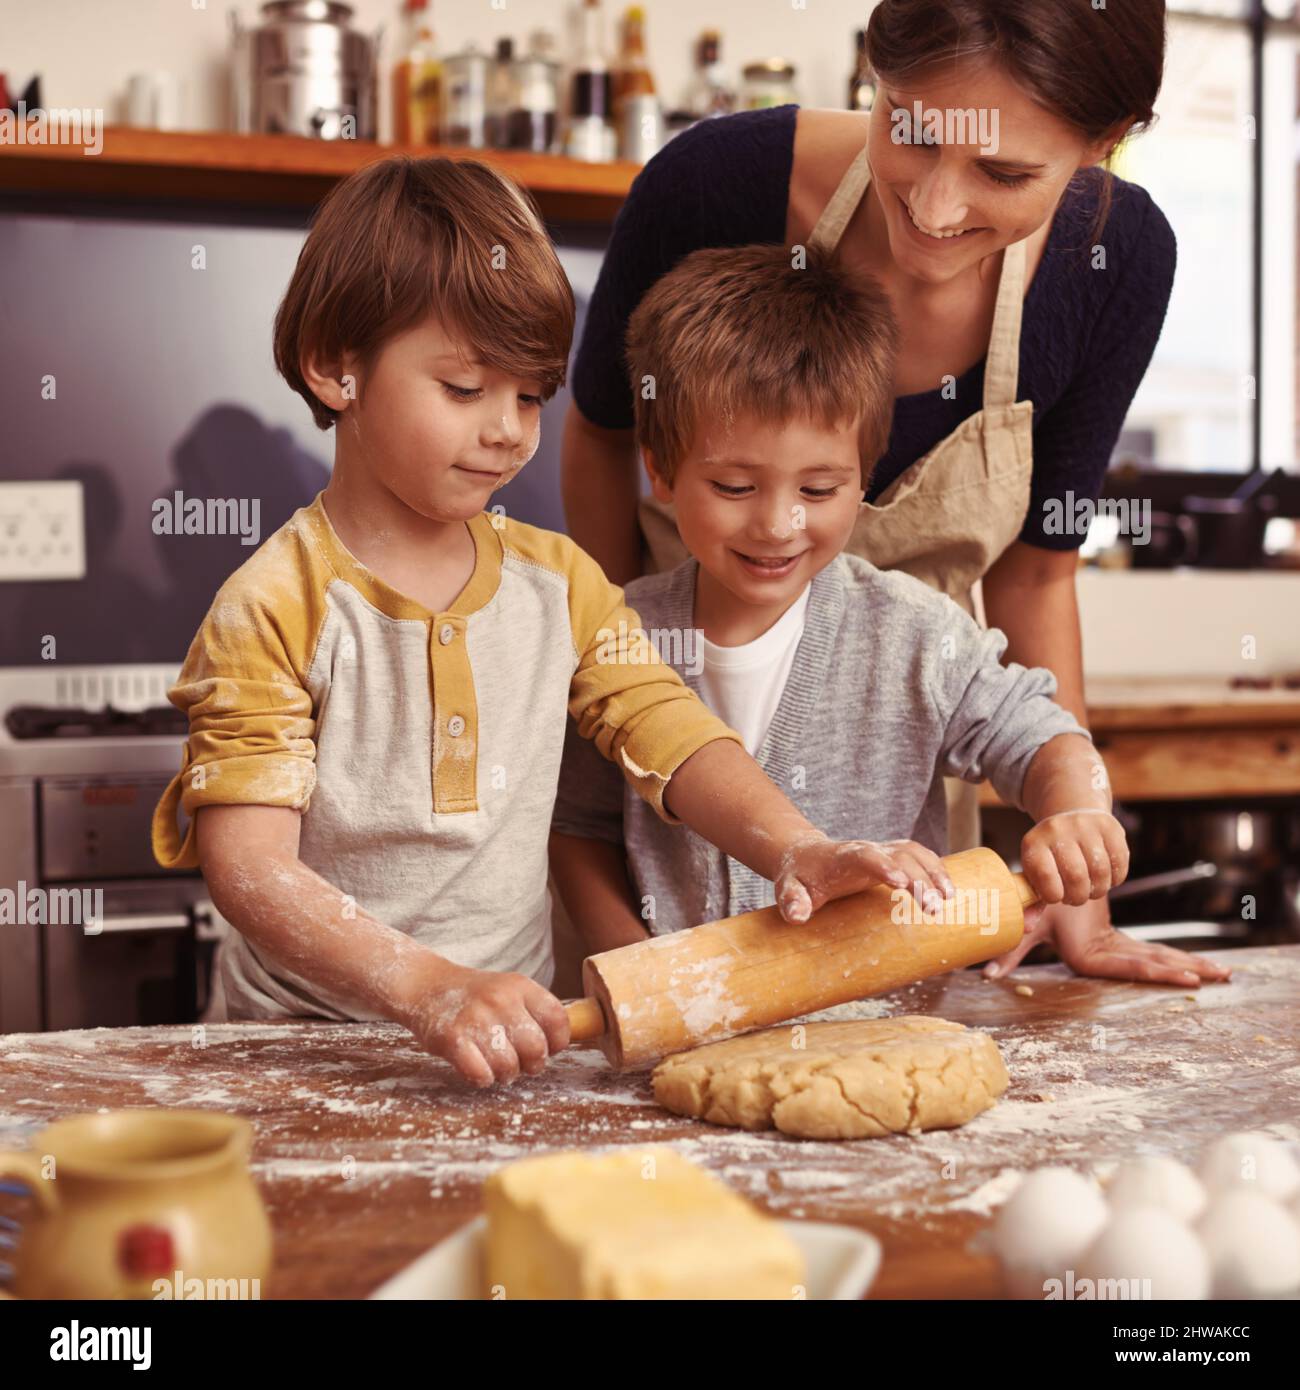 Messy but tasty. Cropped shot of two young brothers baking in the kitchen. Stock Photo